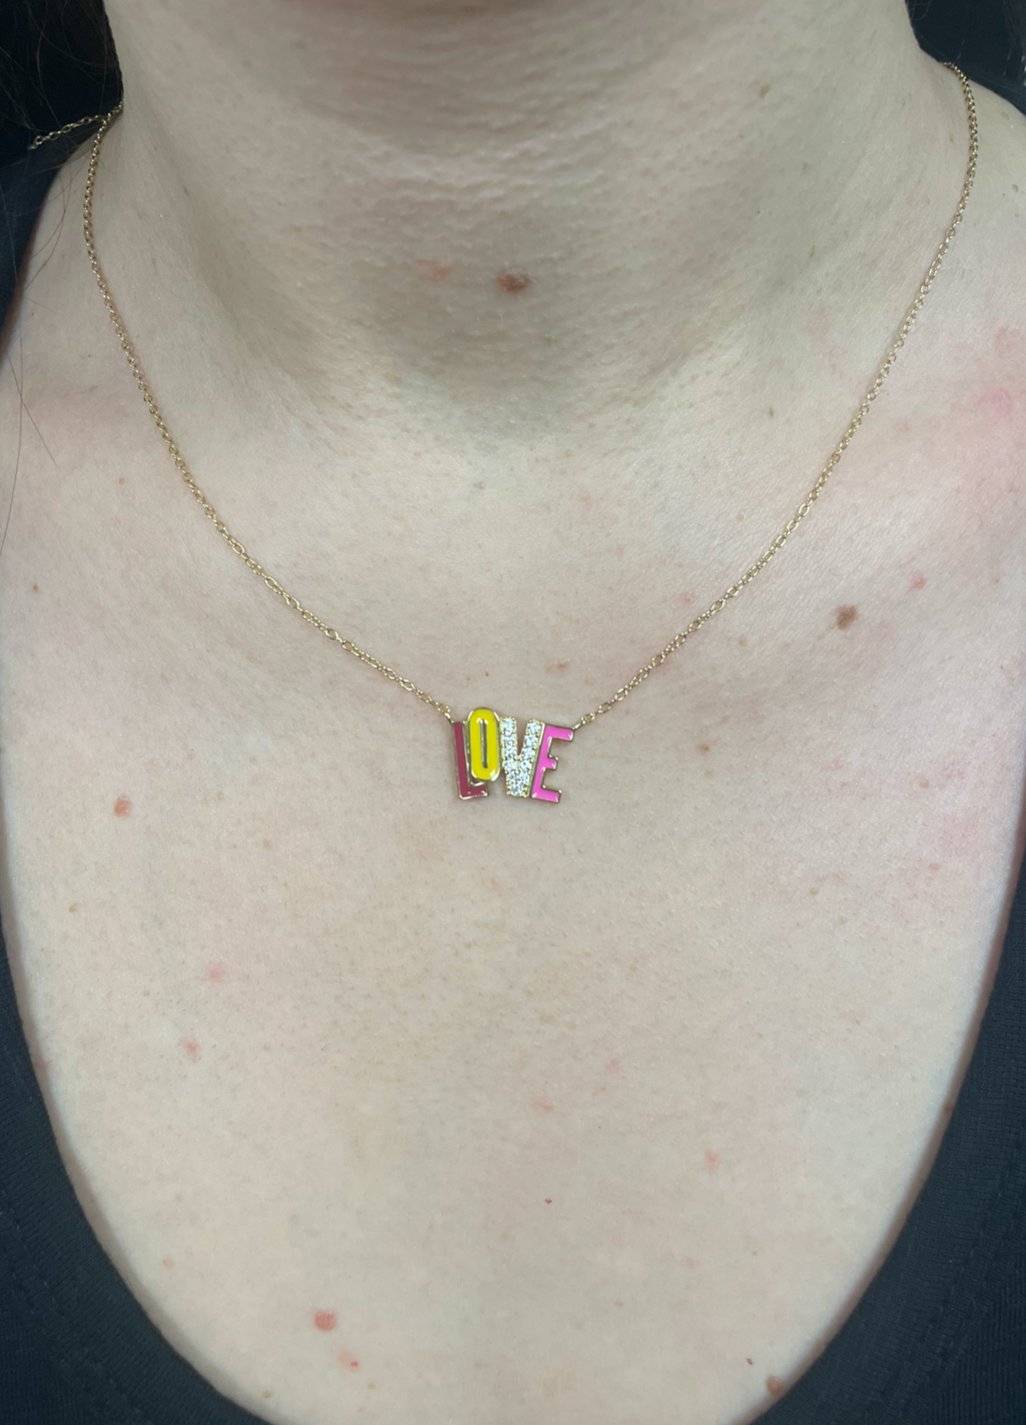 Gold Colourful "Love" Necklace